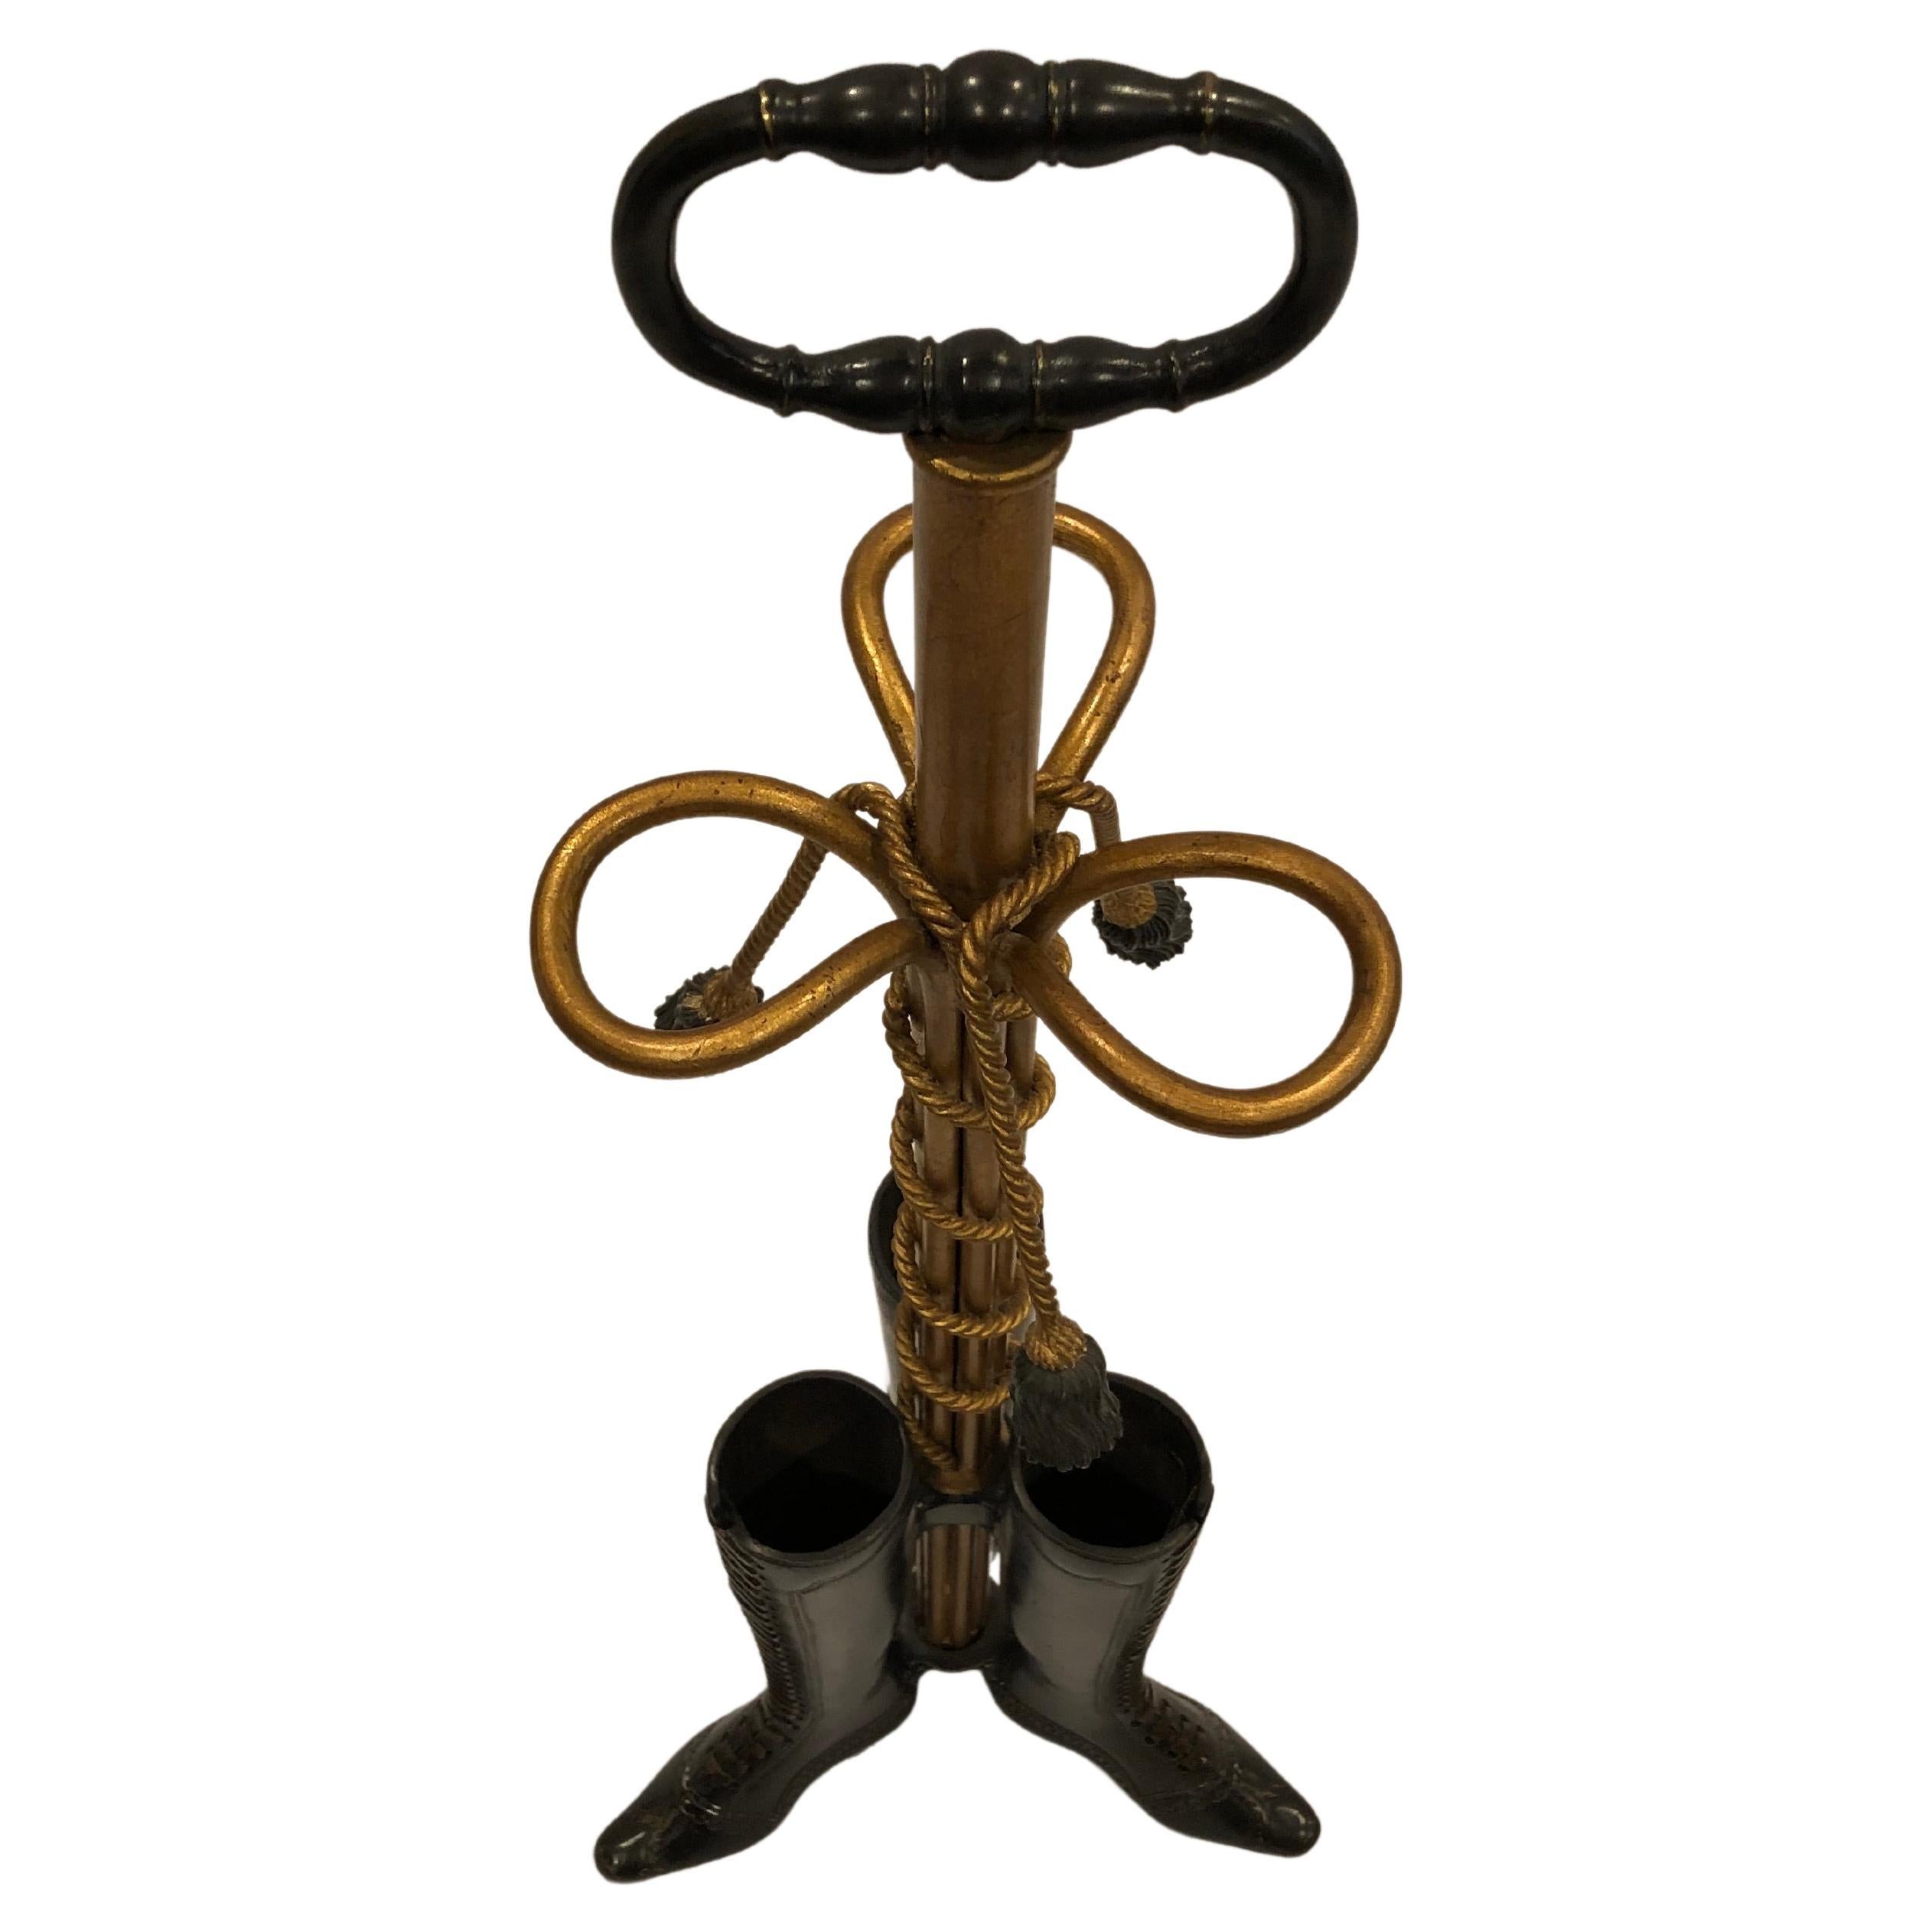 Incredible and whimsical umbrella stand that's a work of art having blackened bronze base in the form of 3 high topped laced ladies boots with the open tops meant for umbrellas or canes. The gilt metal central column is embellished with a pretty